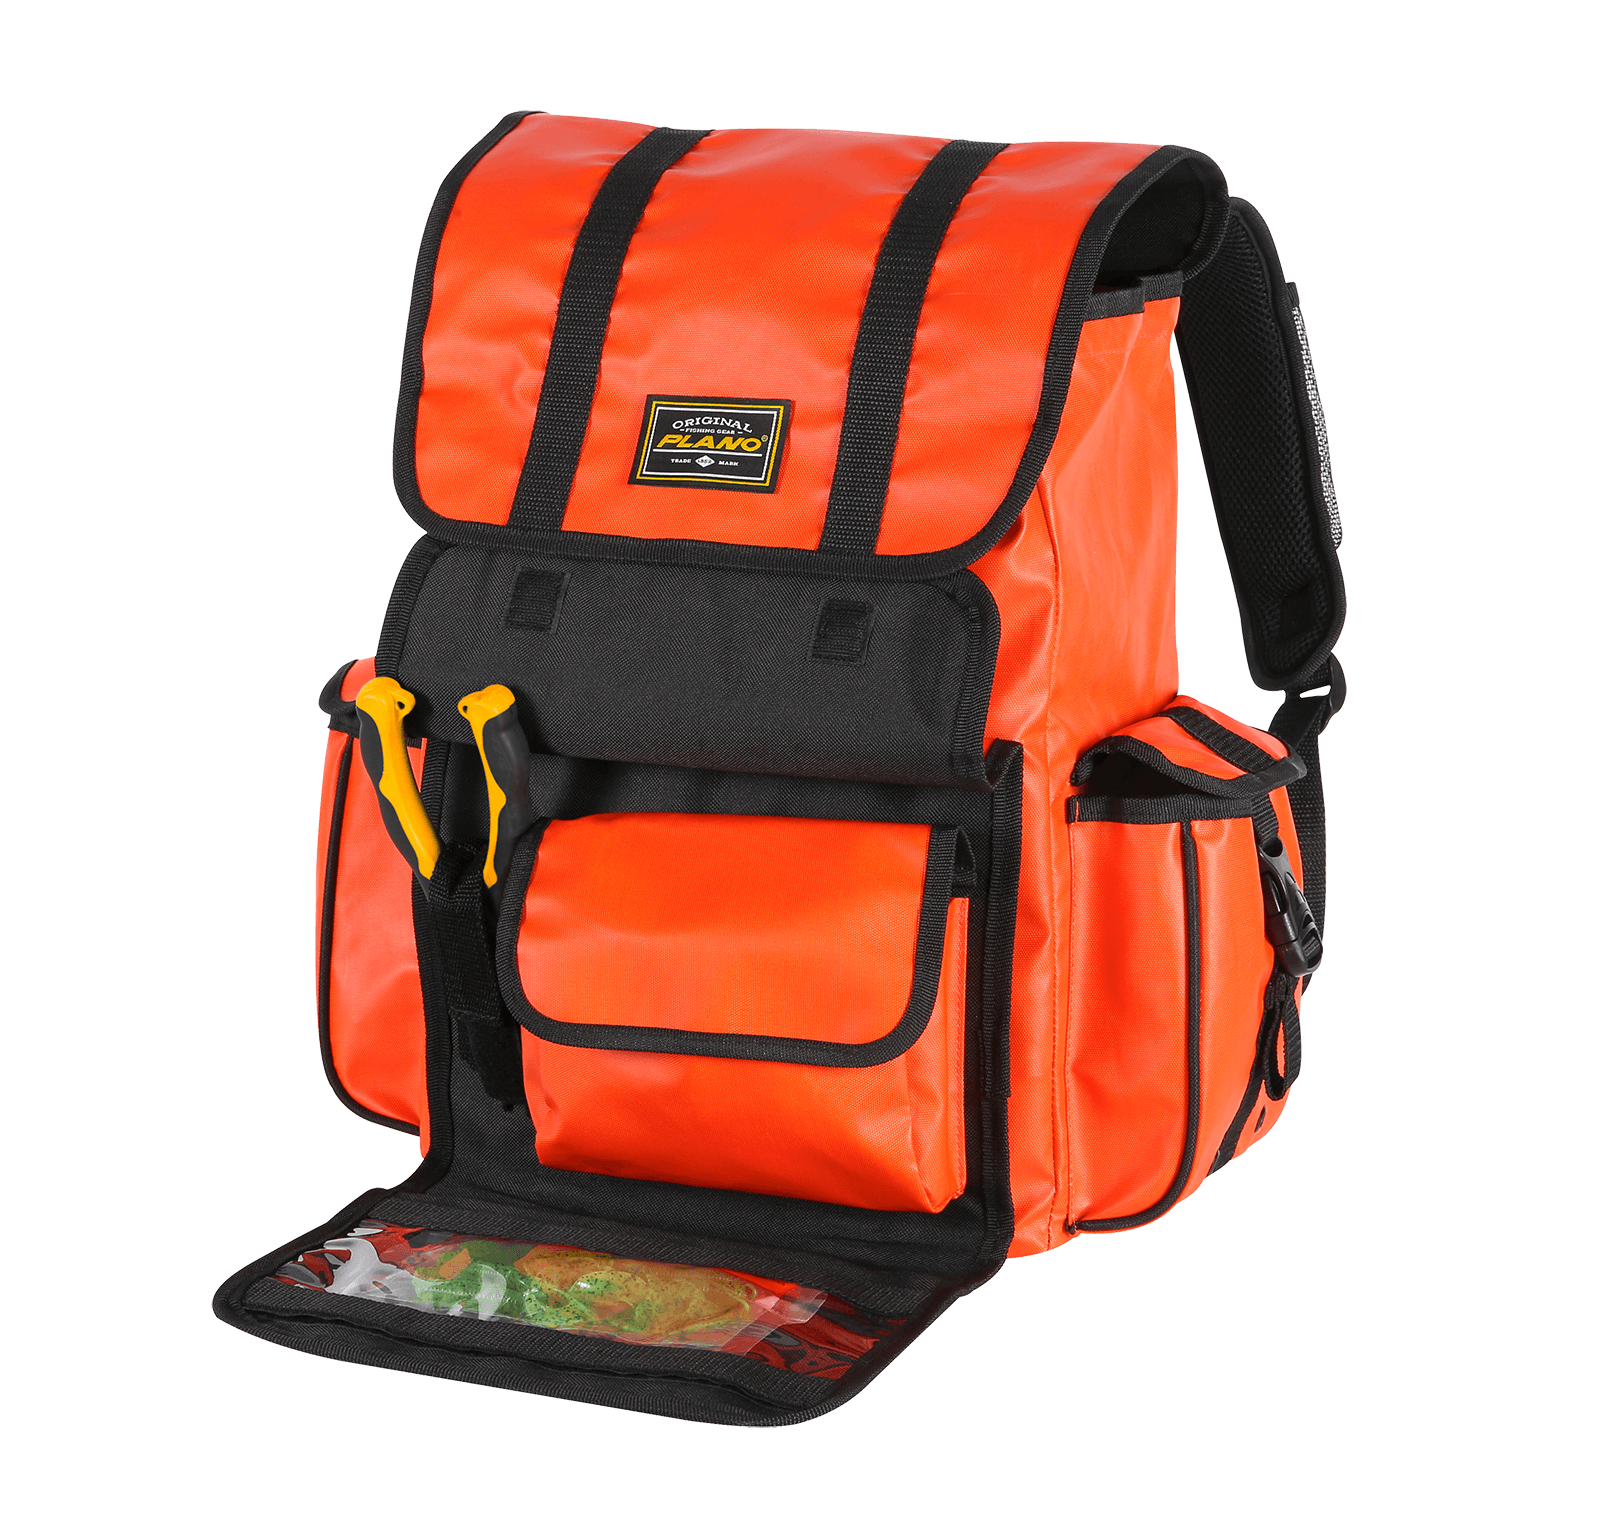 https://payneoutdoors.com/wp-content/uploads/2017/12/Plano-Z-Series-Backpack.png